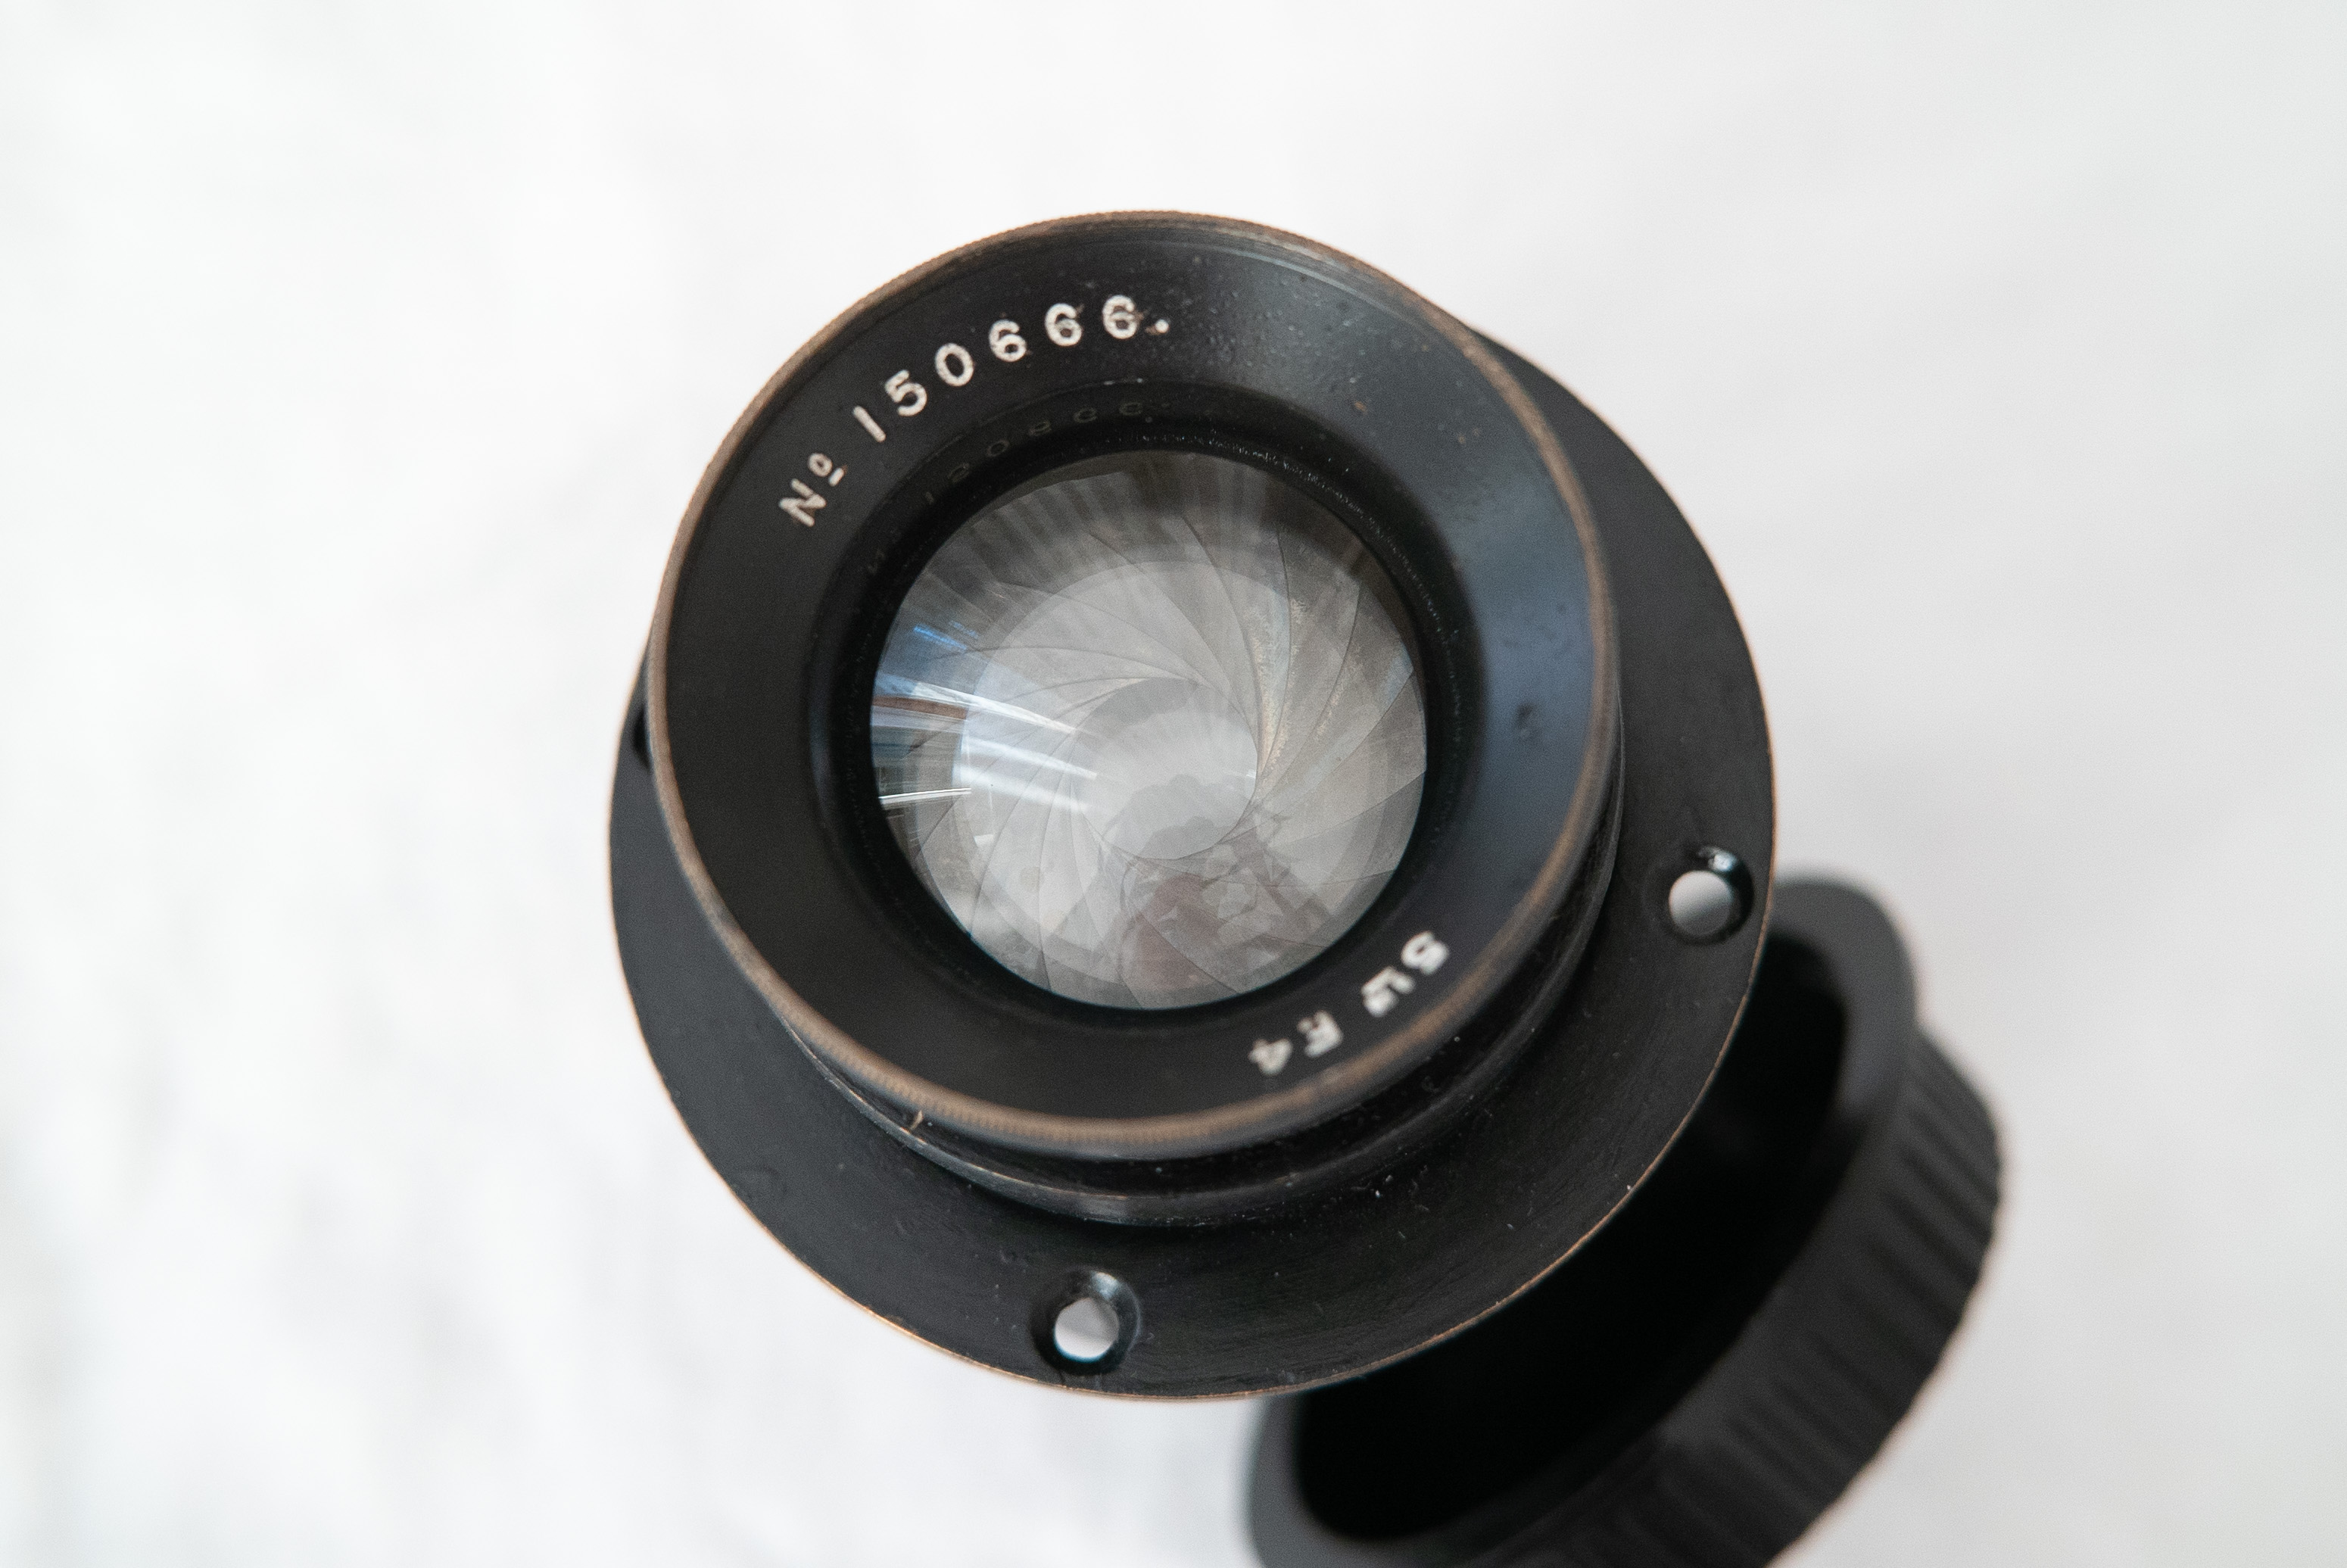 Front view of the lens.